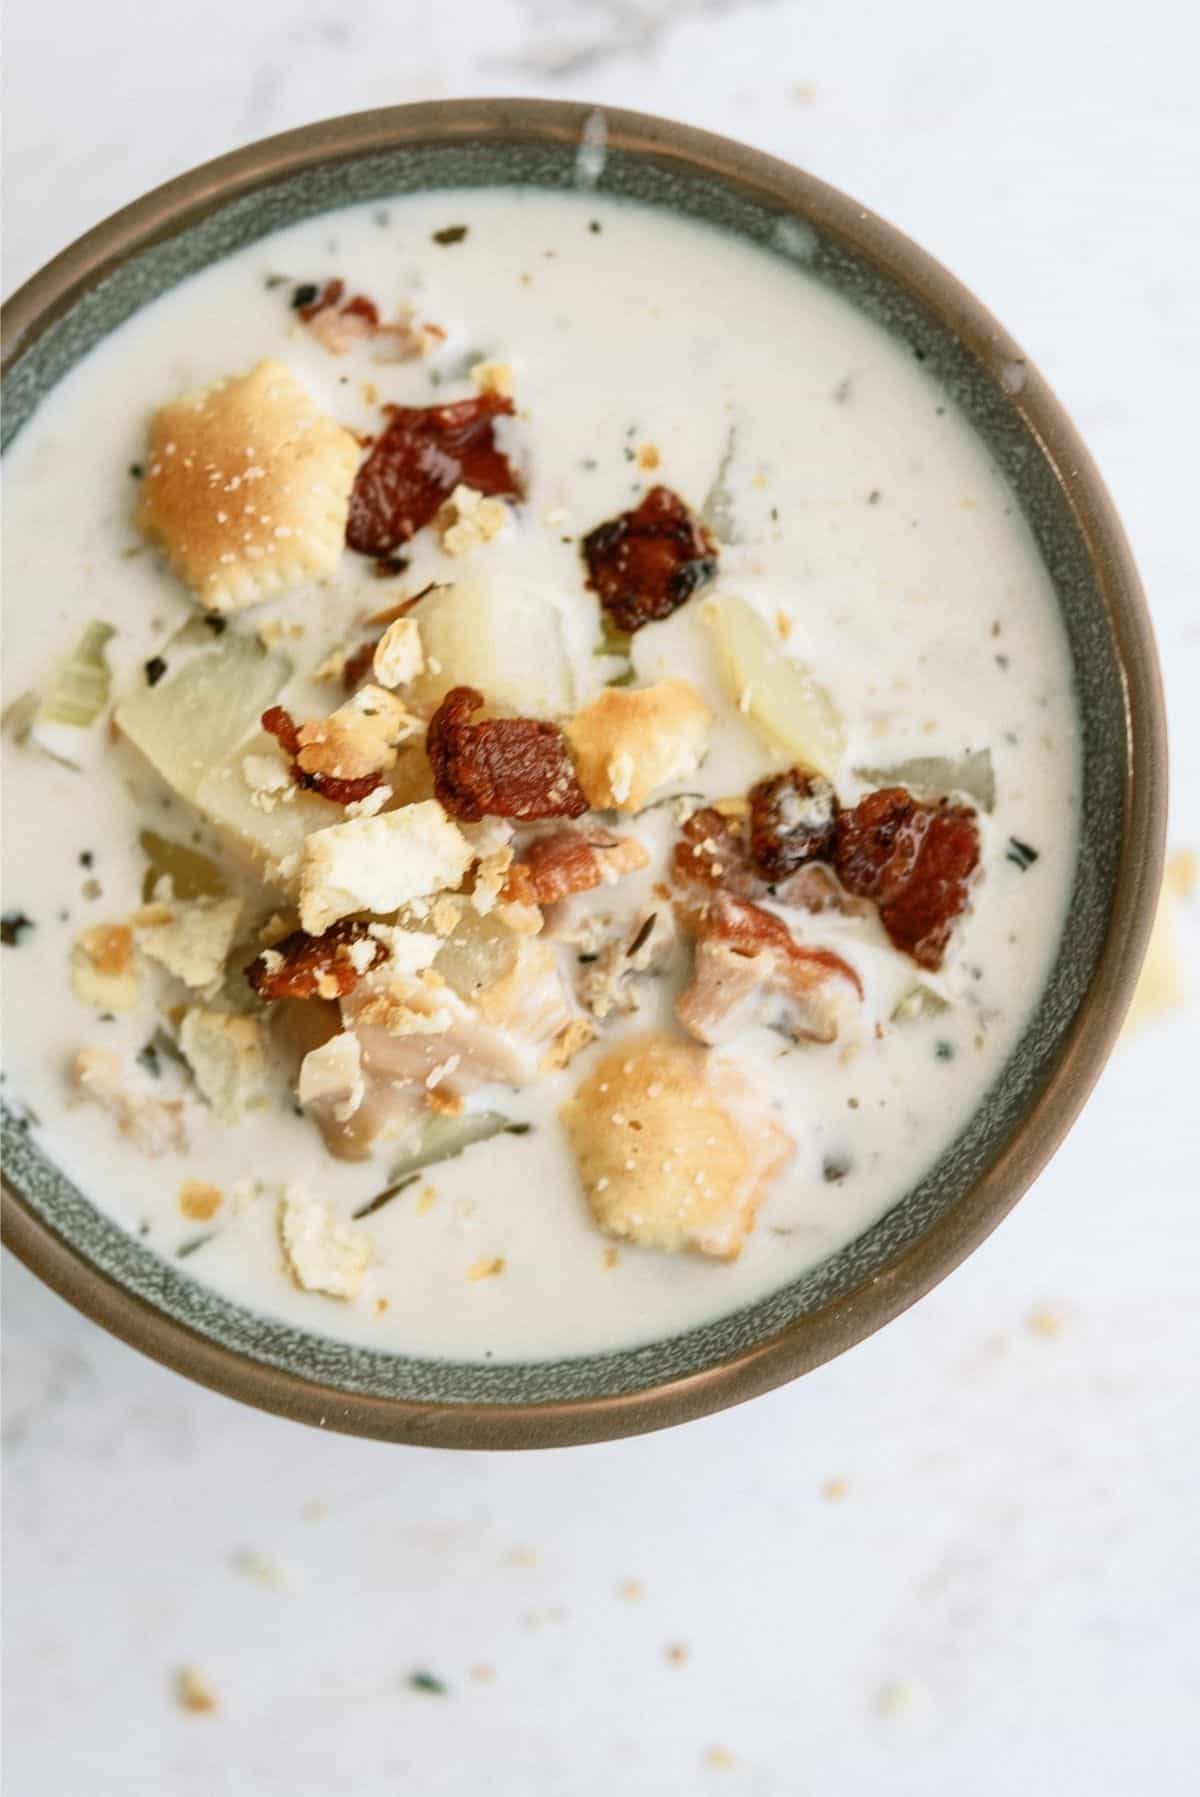 https://www.sixsistersstuff.com/wp-content/uploads/2013/12/Slow-Cooker-New-England-Clam-Chowder-1.jpg